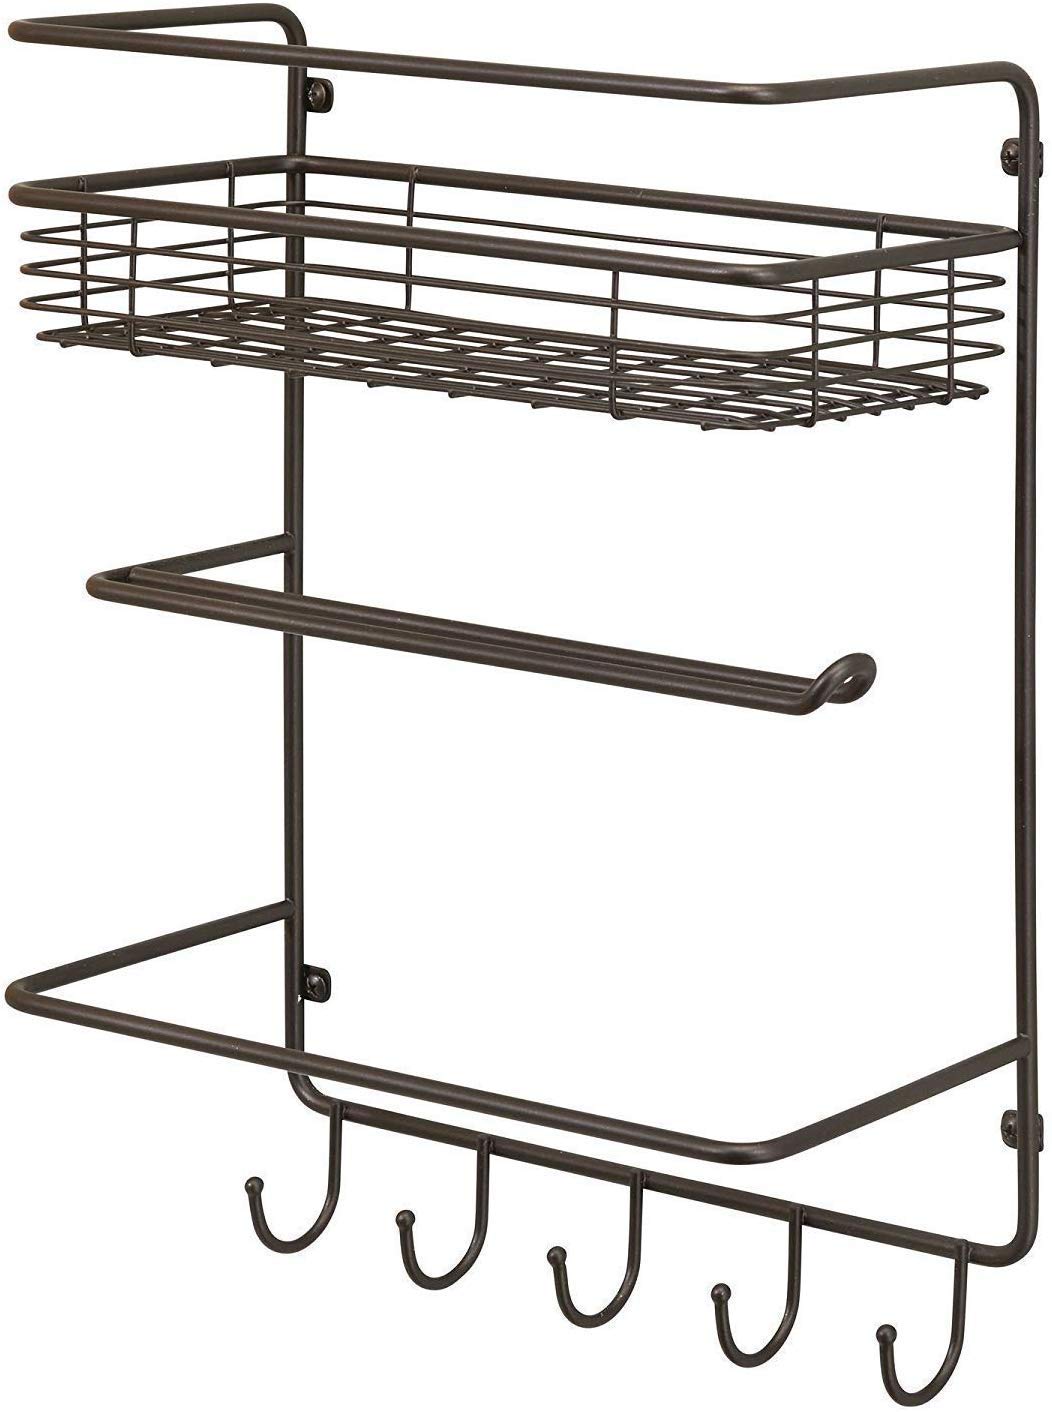 Iron Wall Mounted Lid Holder Paper Towel Holder with Storage Shelf and Hooks for Kitchen Condiment Stand Over The Balcony Grill Rack Dime Store